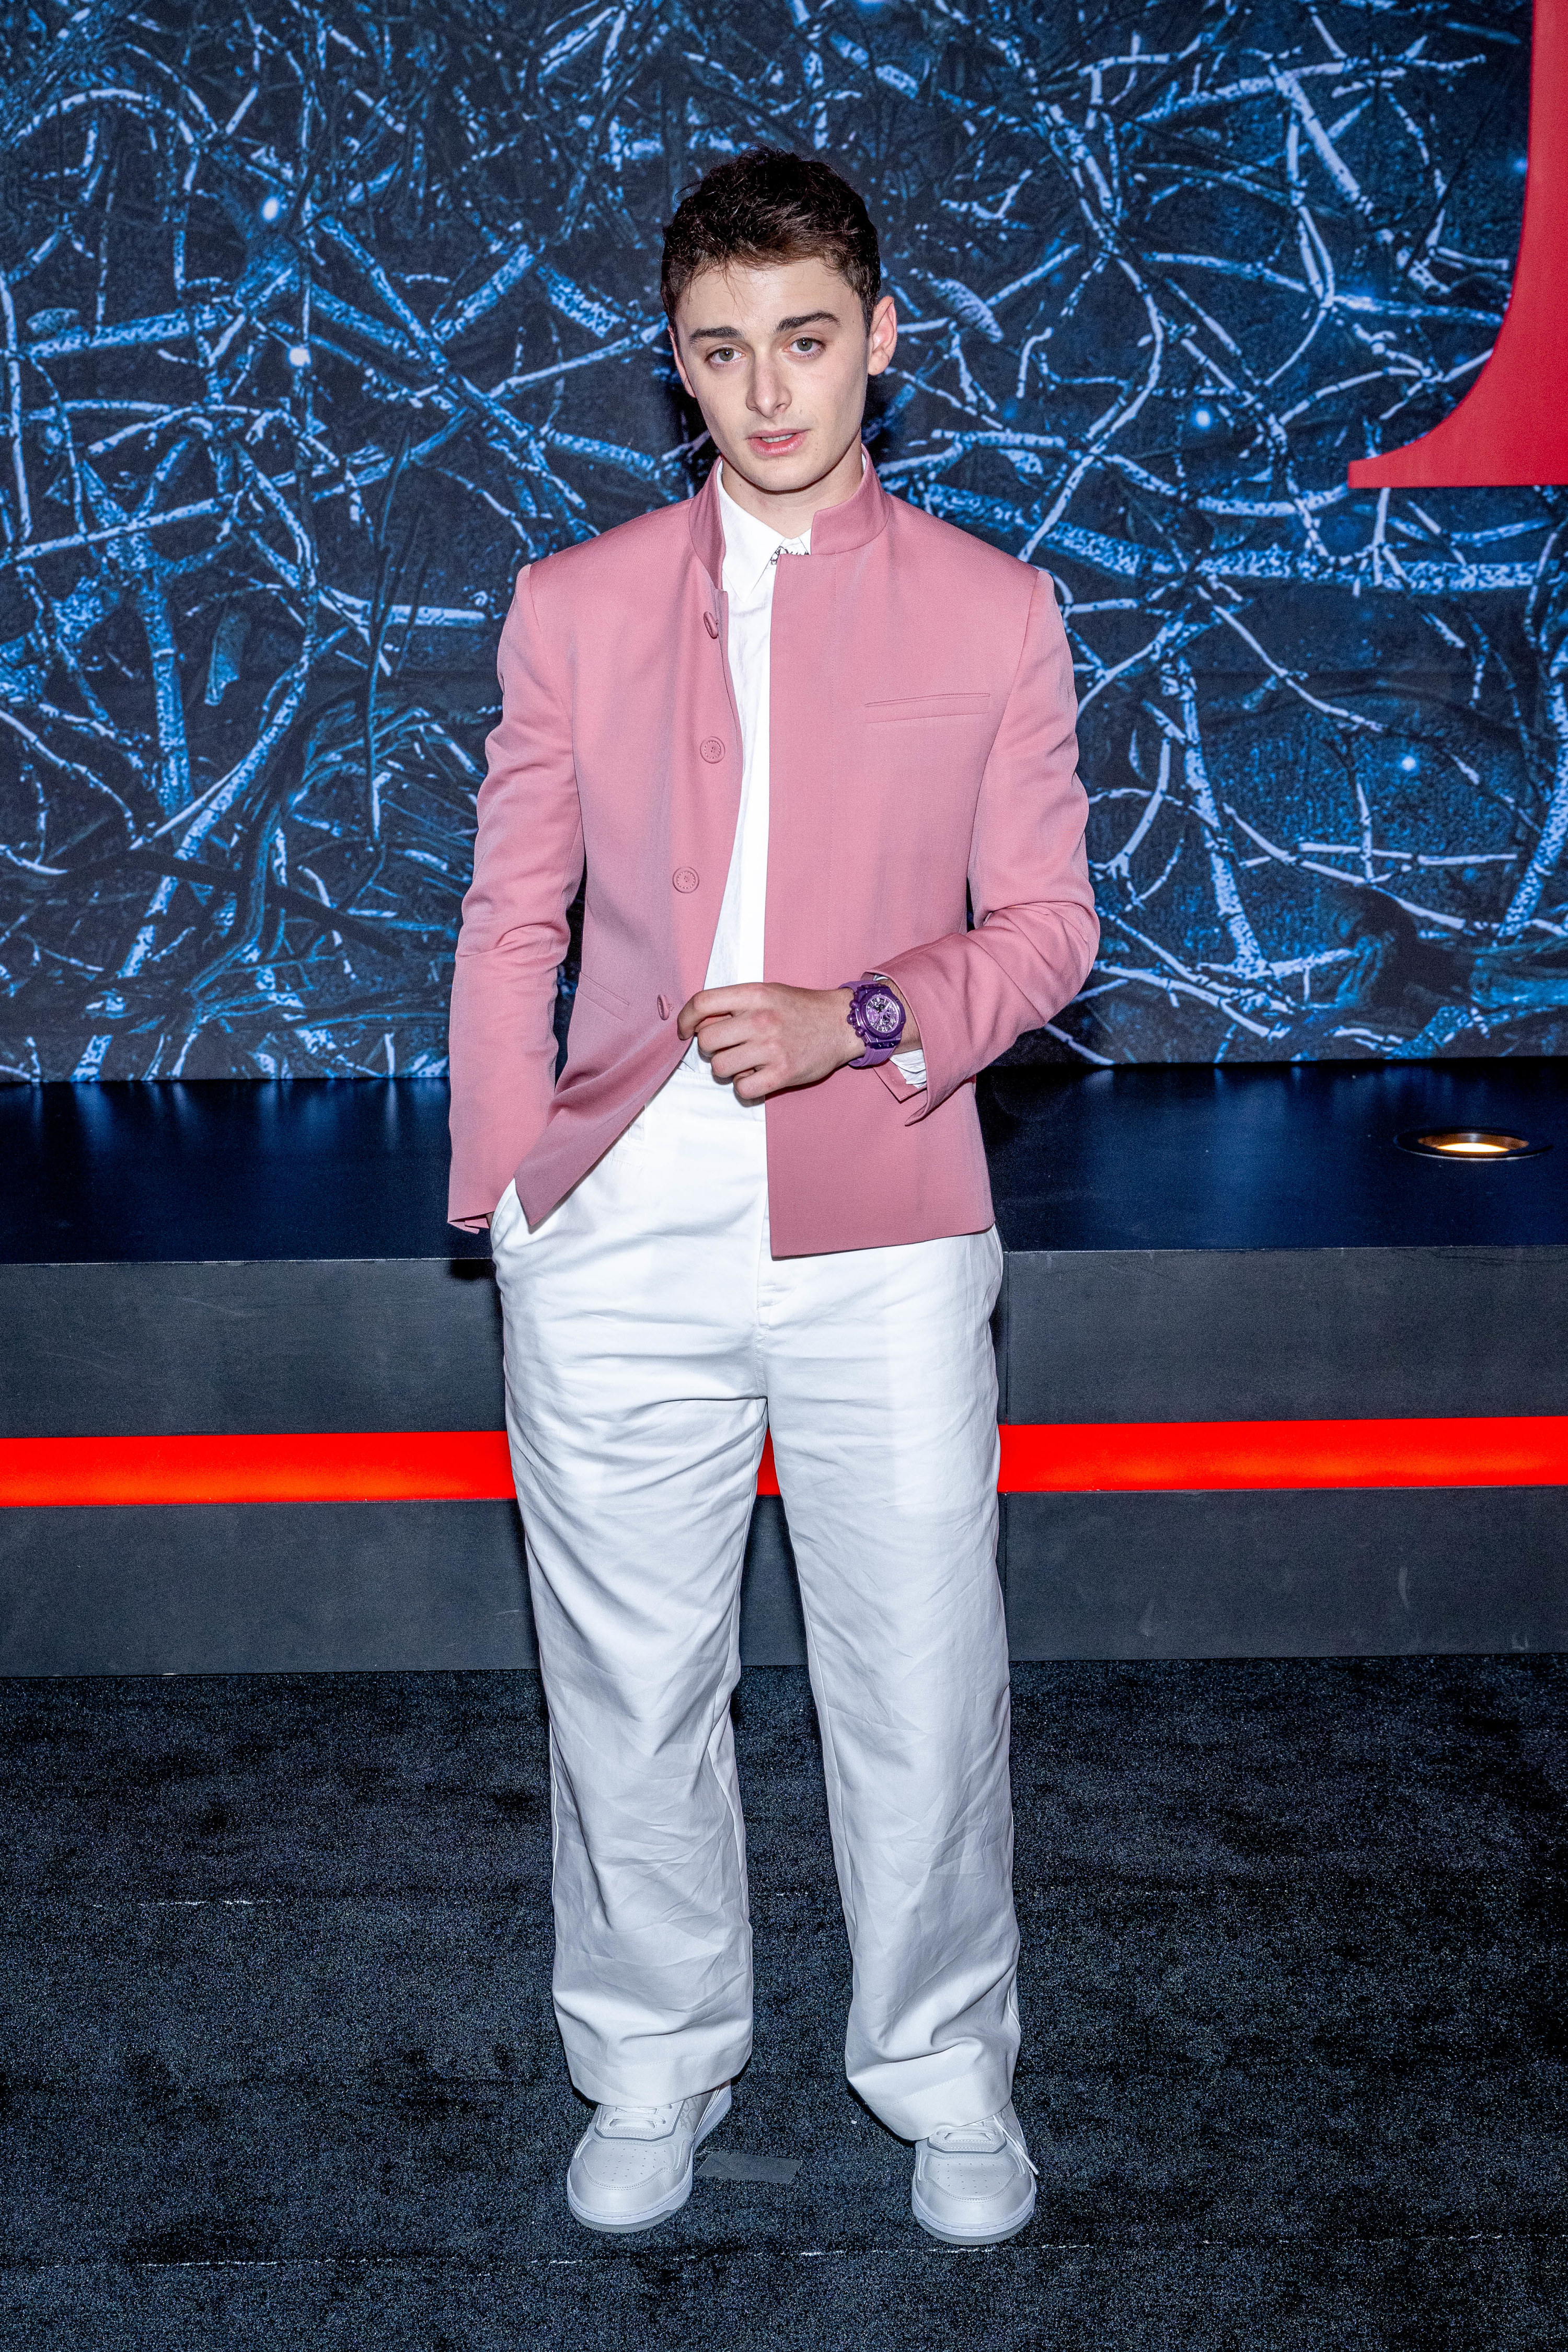 Noah looking much older and more fashionable, with white pants, a pink jacket, and a large watch